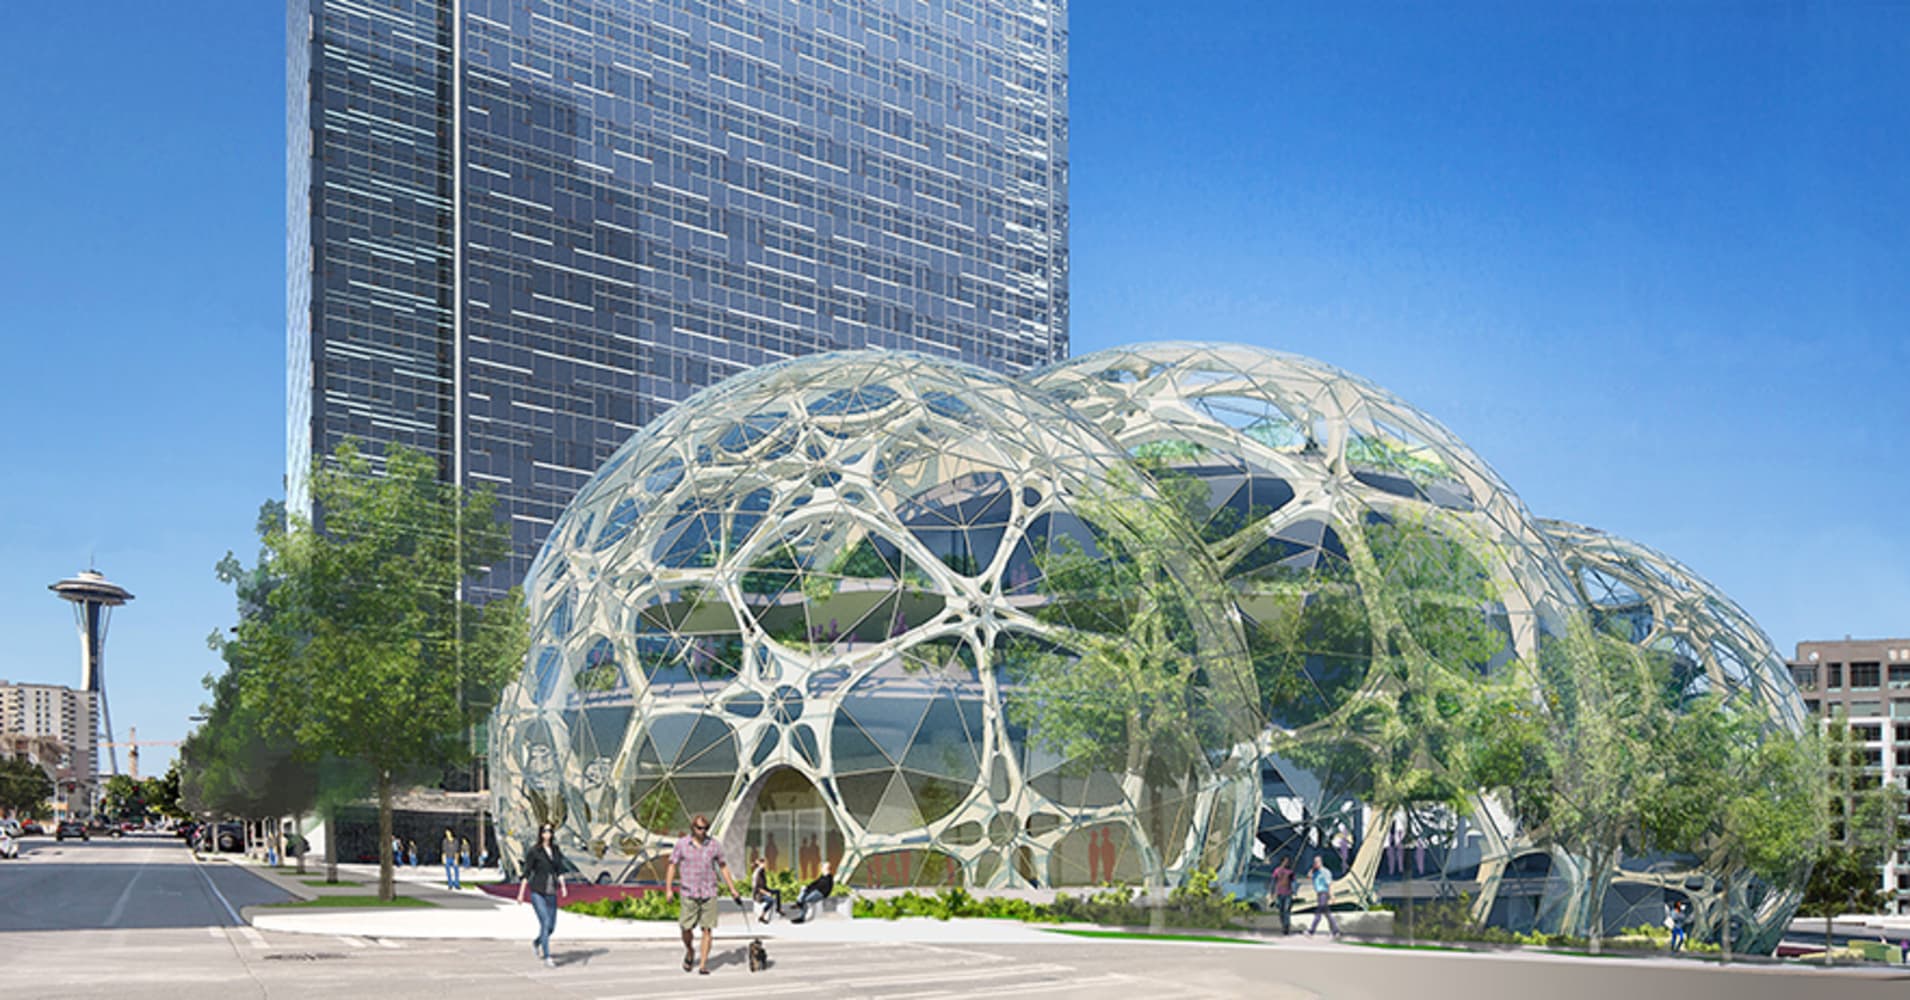 Amazon's new odd-looking new headquarters in downtown Seattle